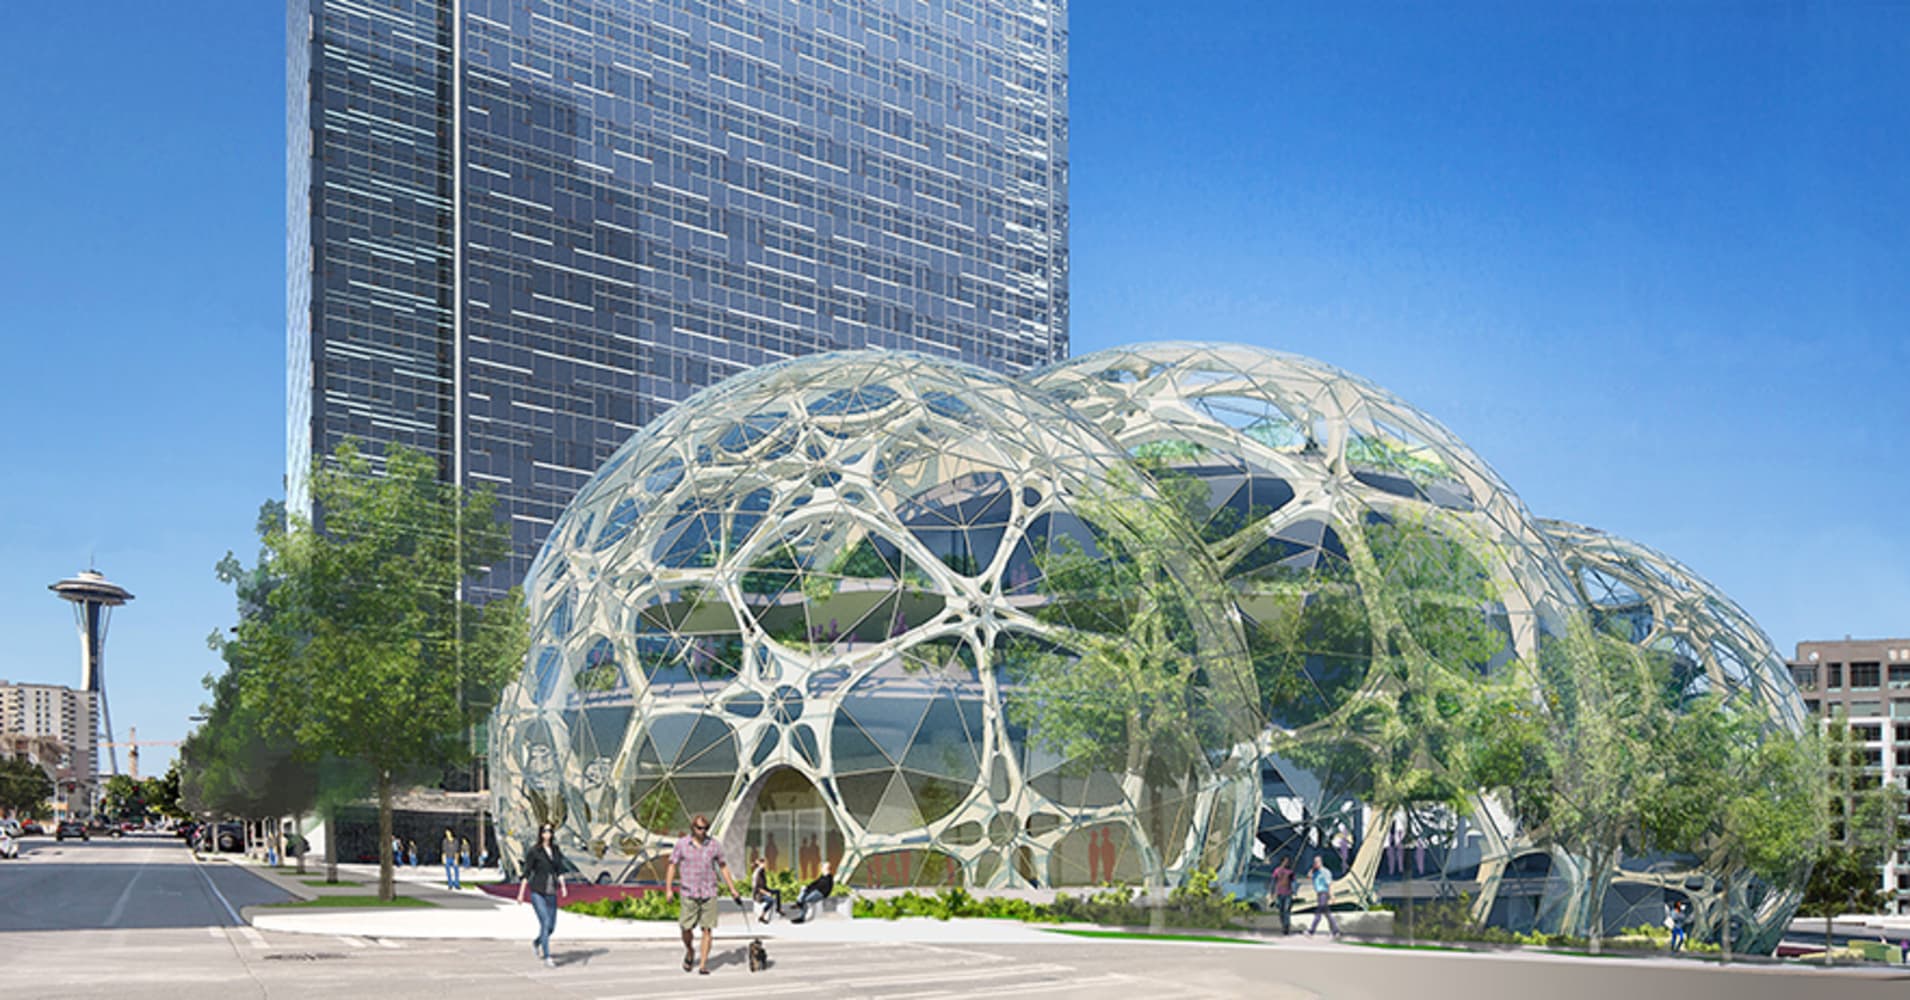 Amazon's new odd-looking new headquarters in downtown Seattle